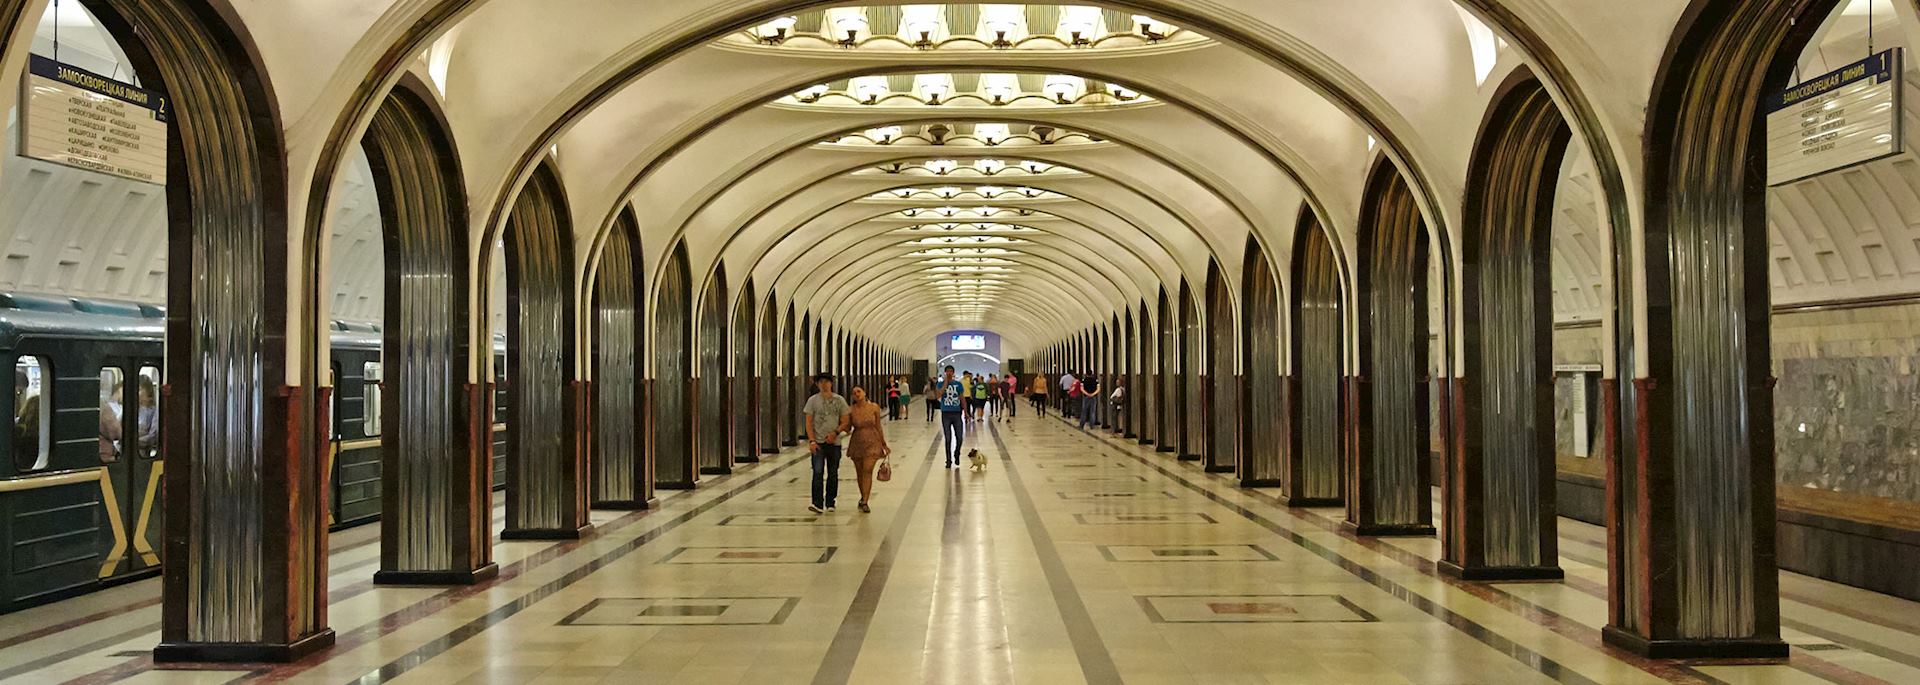 Underground station in Moscow